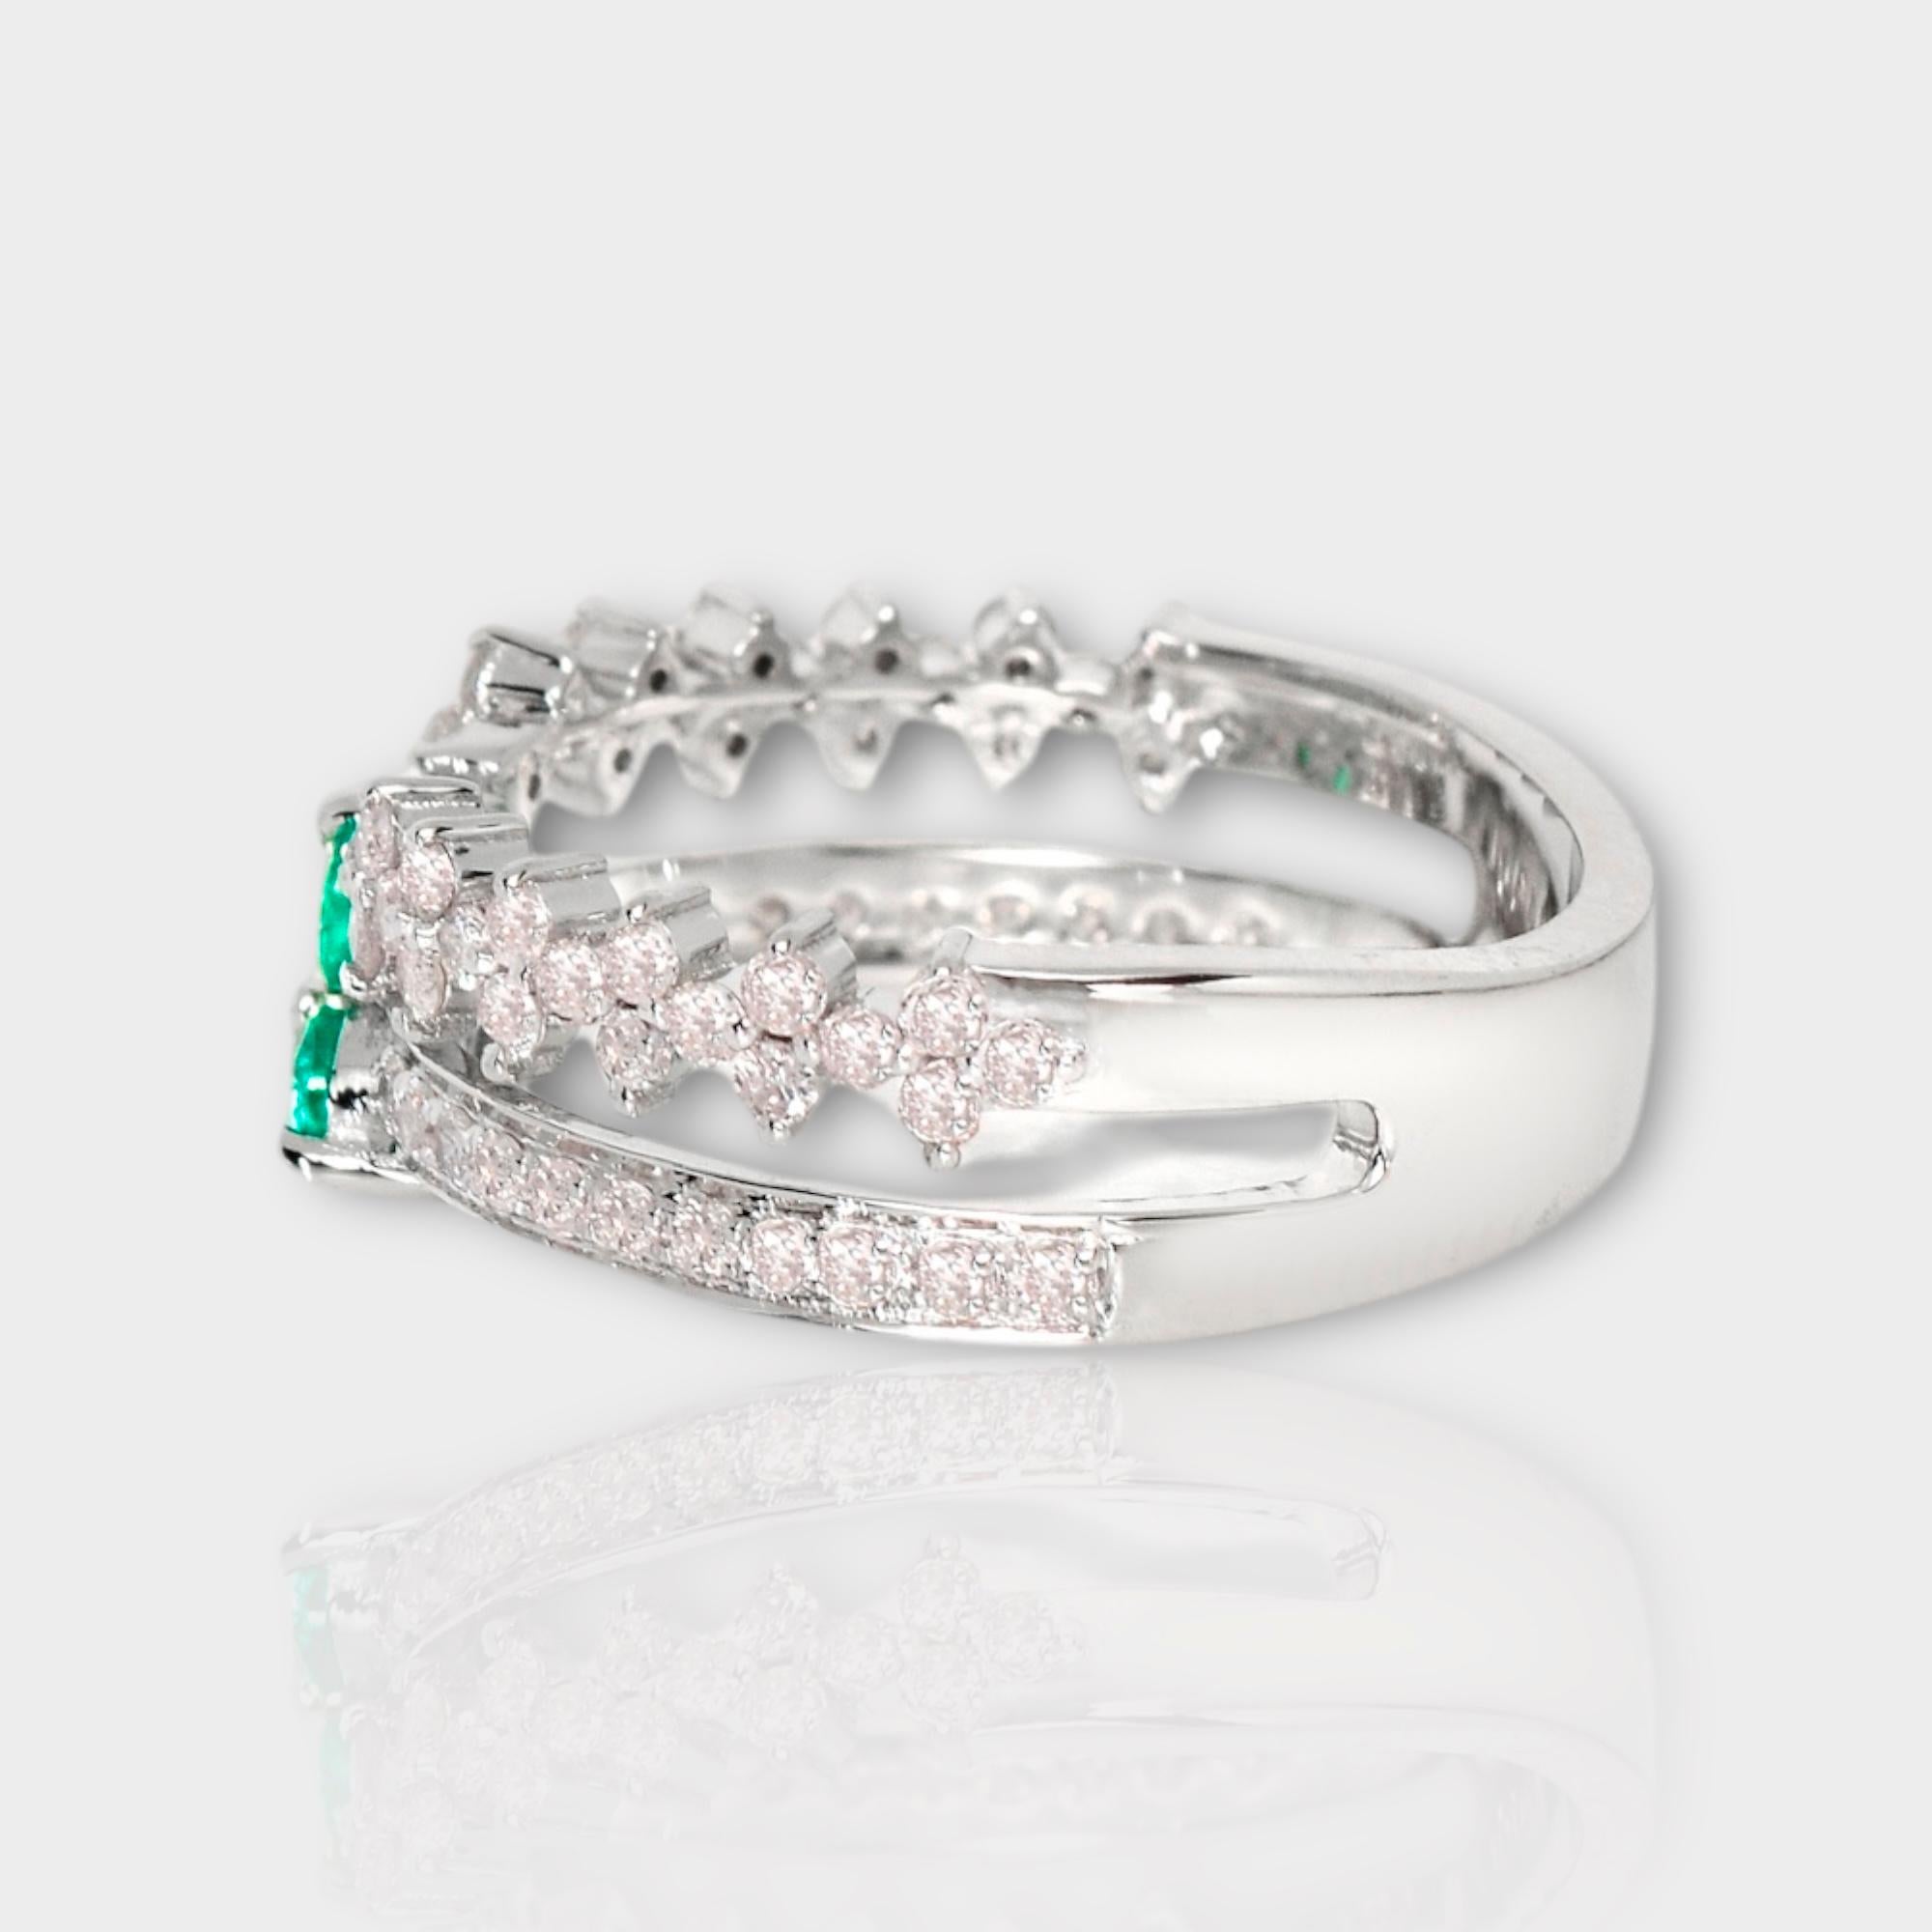 IGI 14K 0.55 ct Natural Pink Diamonds&Emerald Vintage Engagement Ring In New Condition For Sale In Kaohsiung City, TW